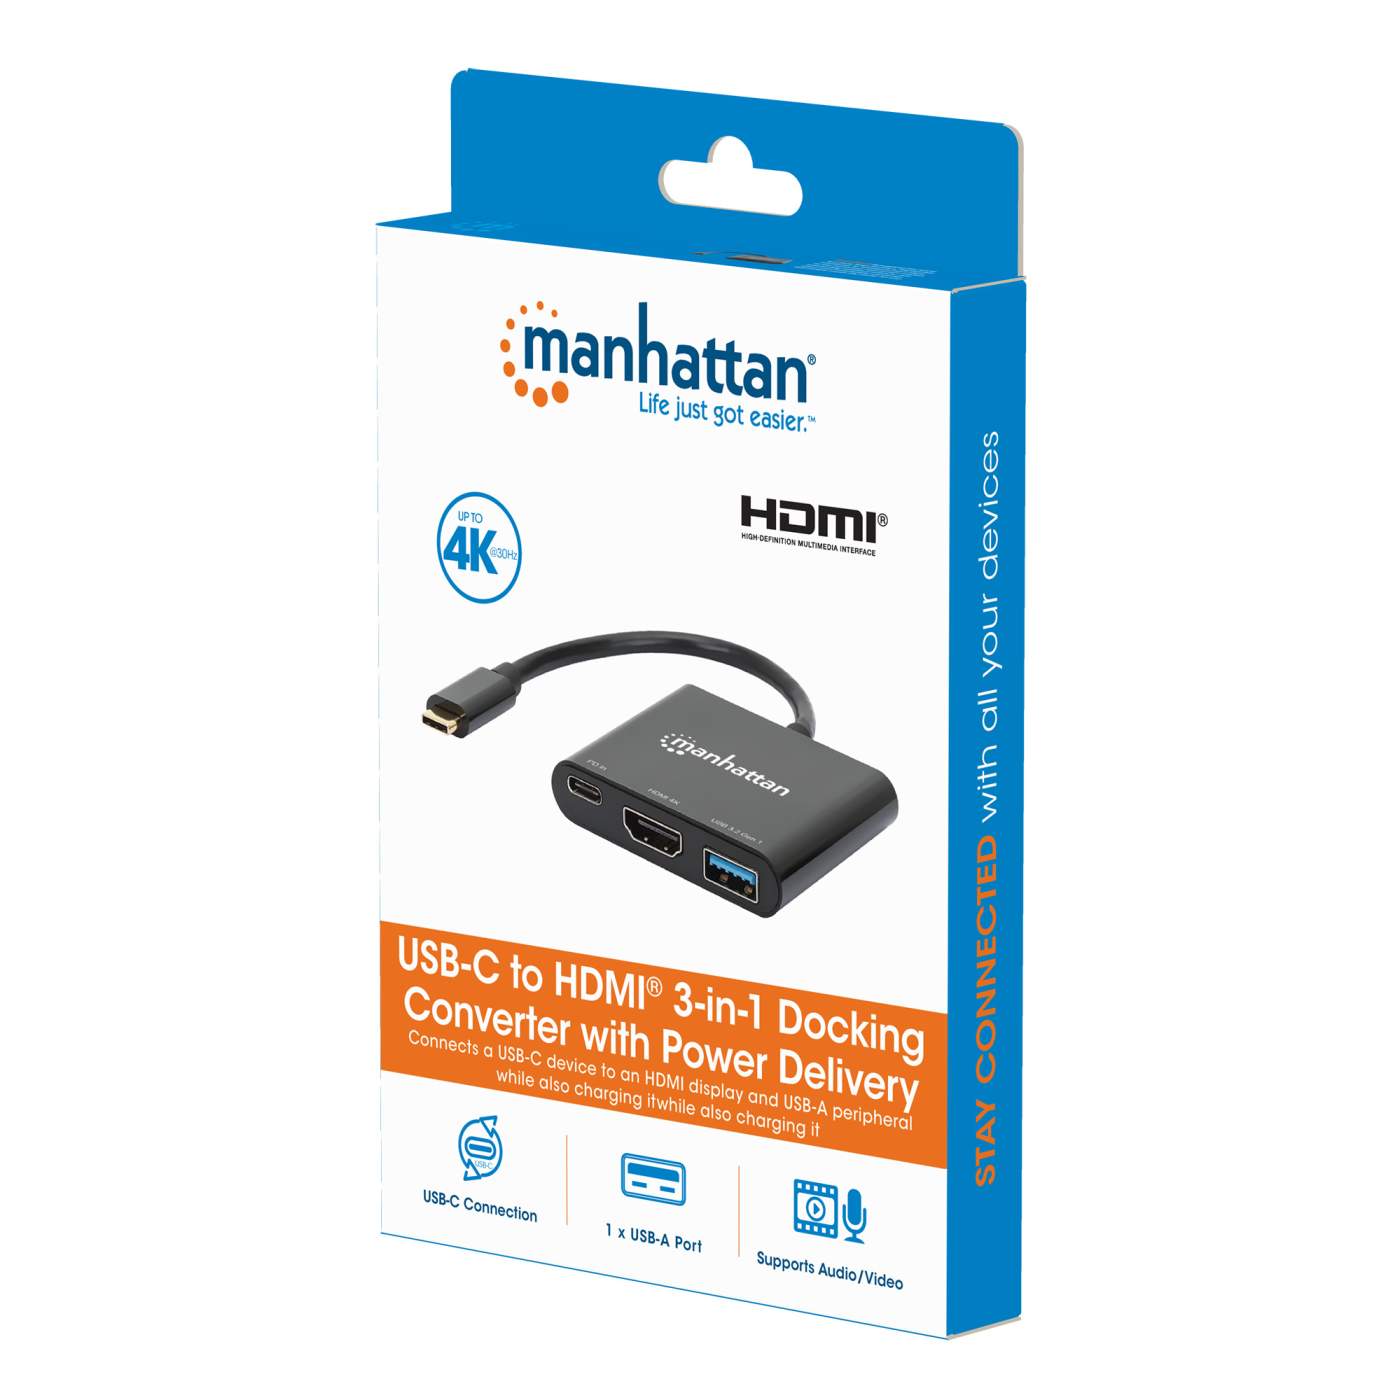 USB-C to HDMI 3-in-1 Docking Converter with Power Delivery Packaging Image 2